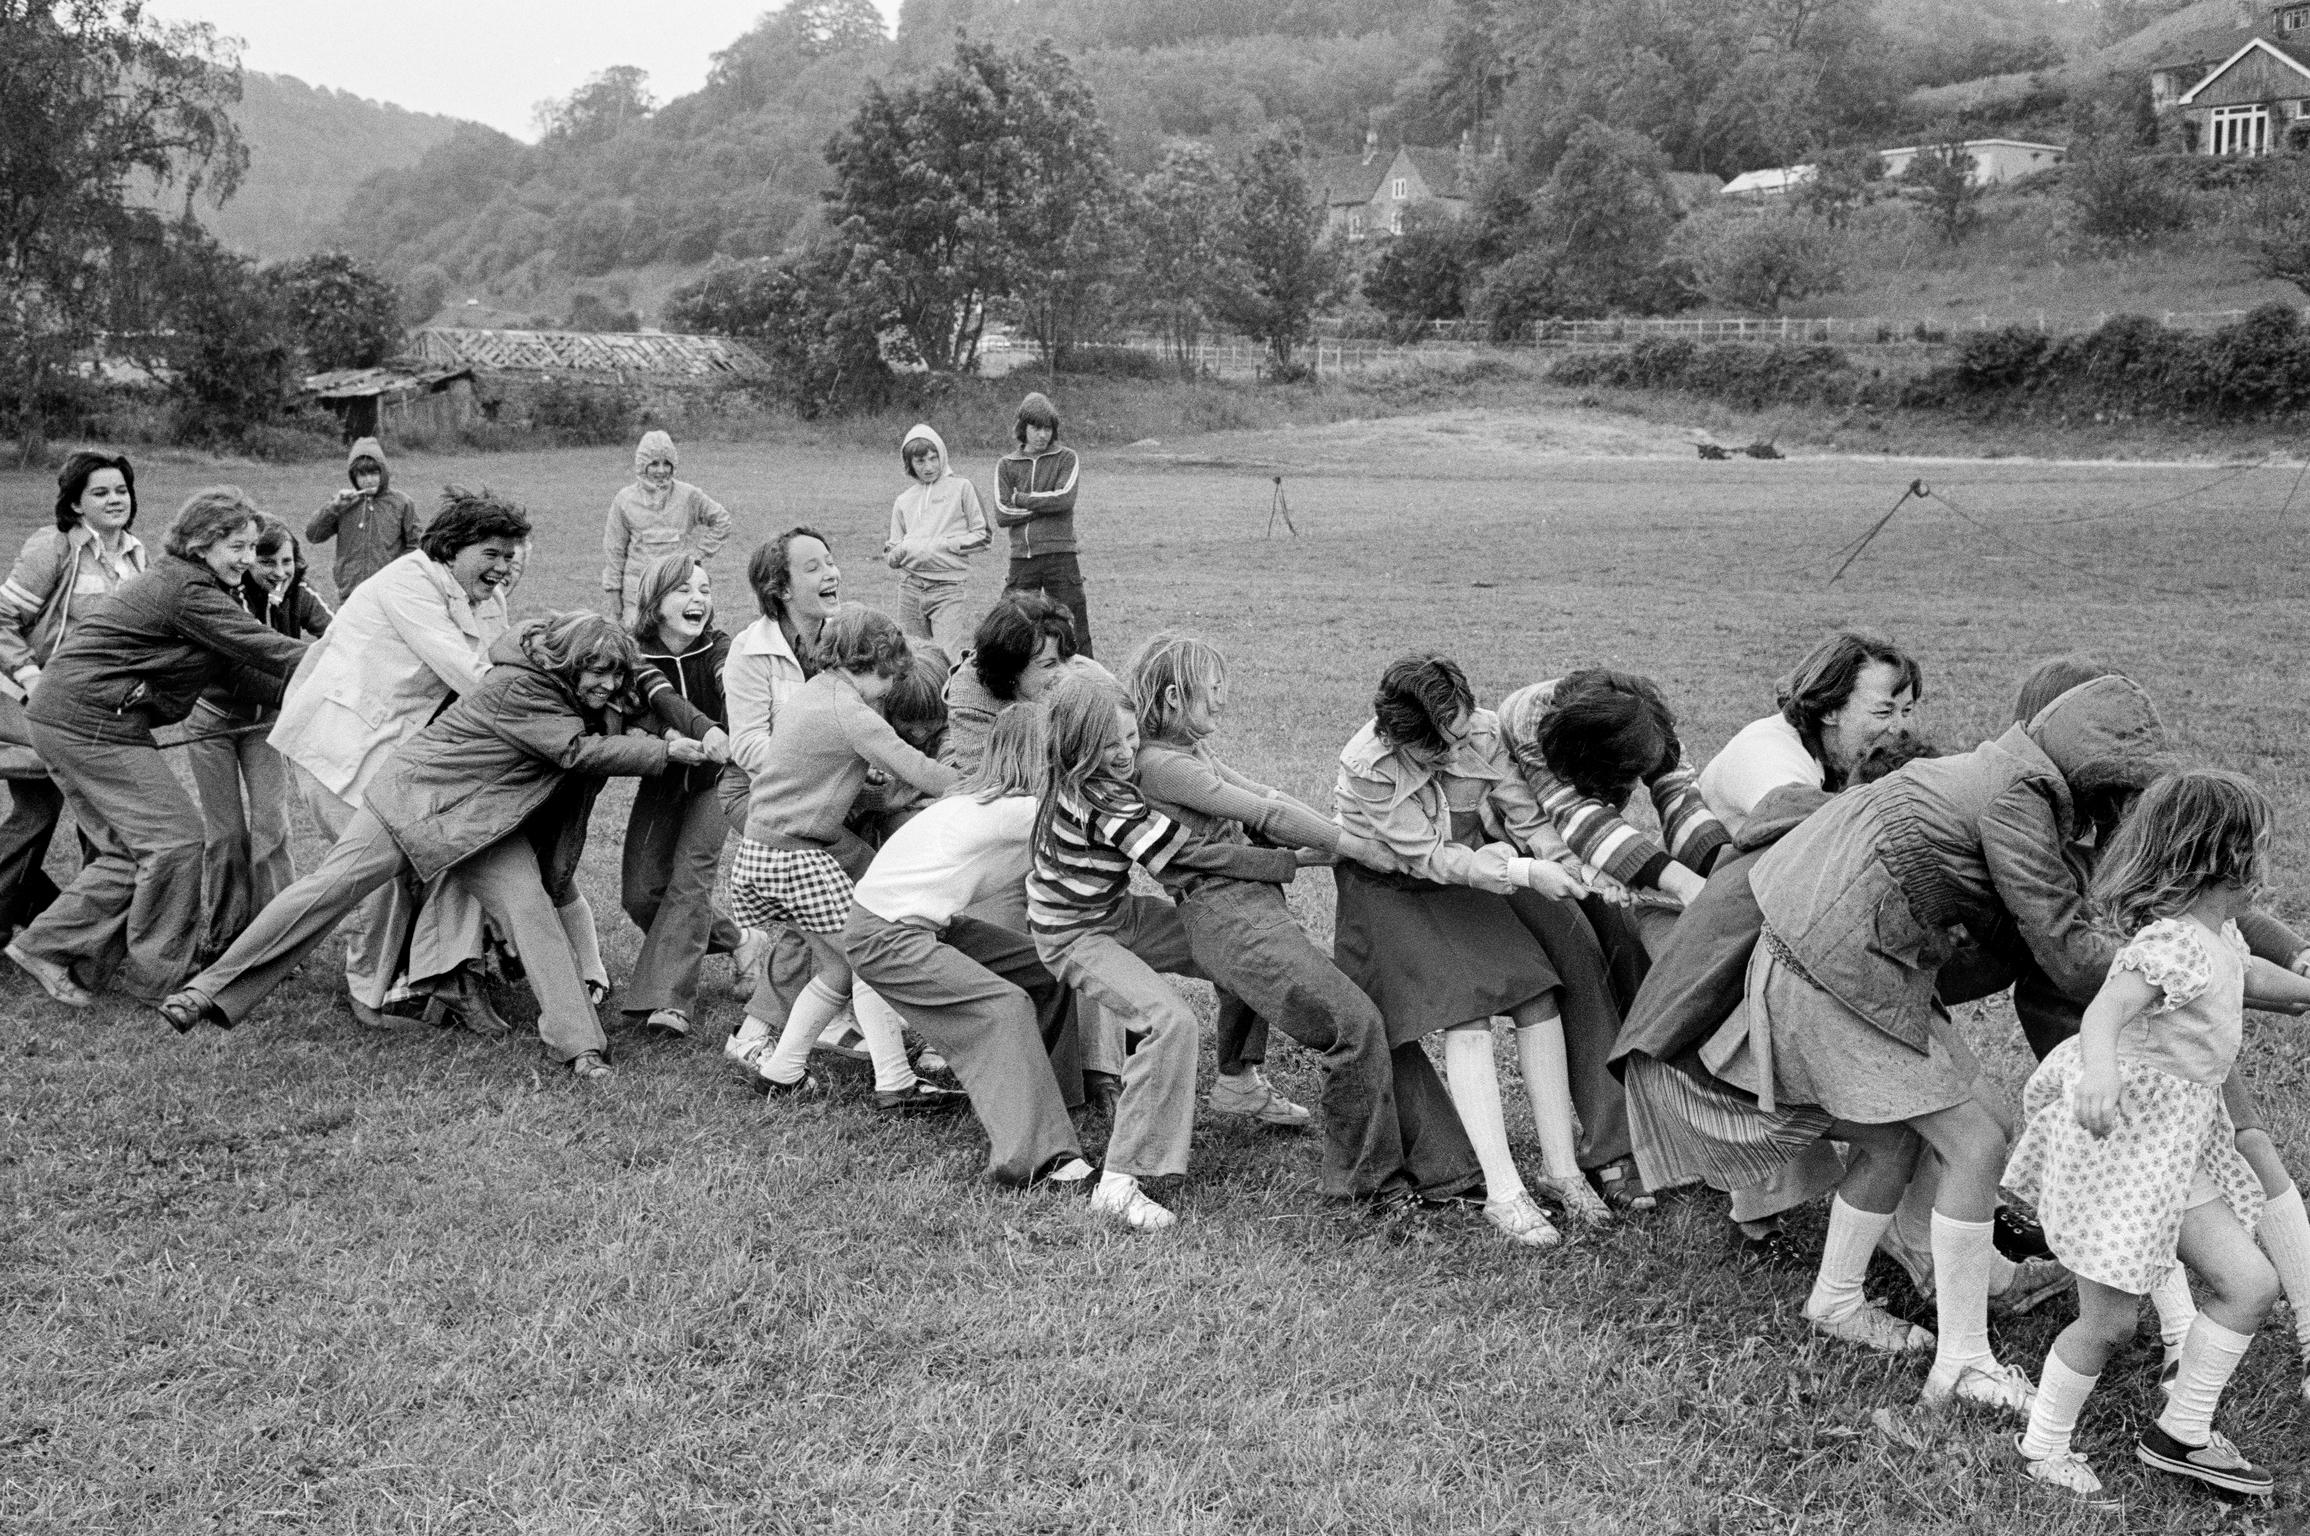 Queens Silver Jubilee Sports day, women's team for tug-of-war, in the rain. Tintern, Wales